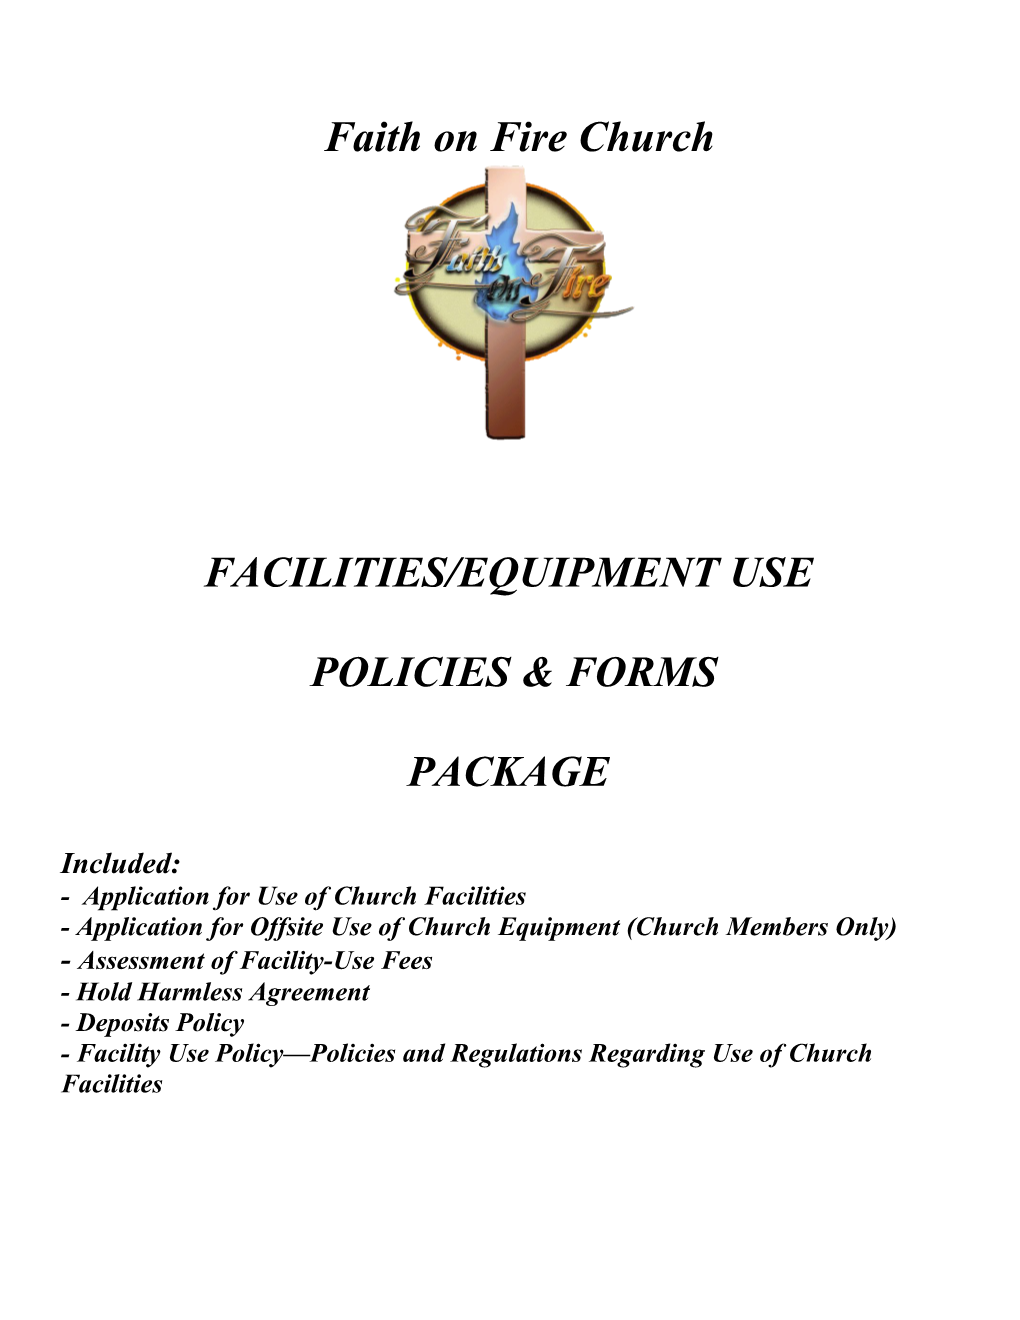 Application for Use of Church Facilities